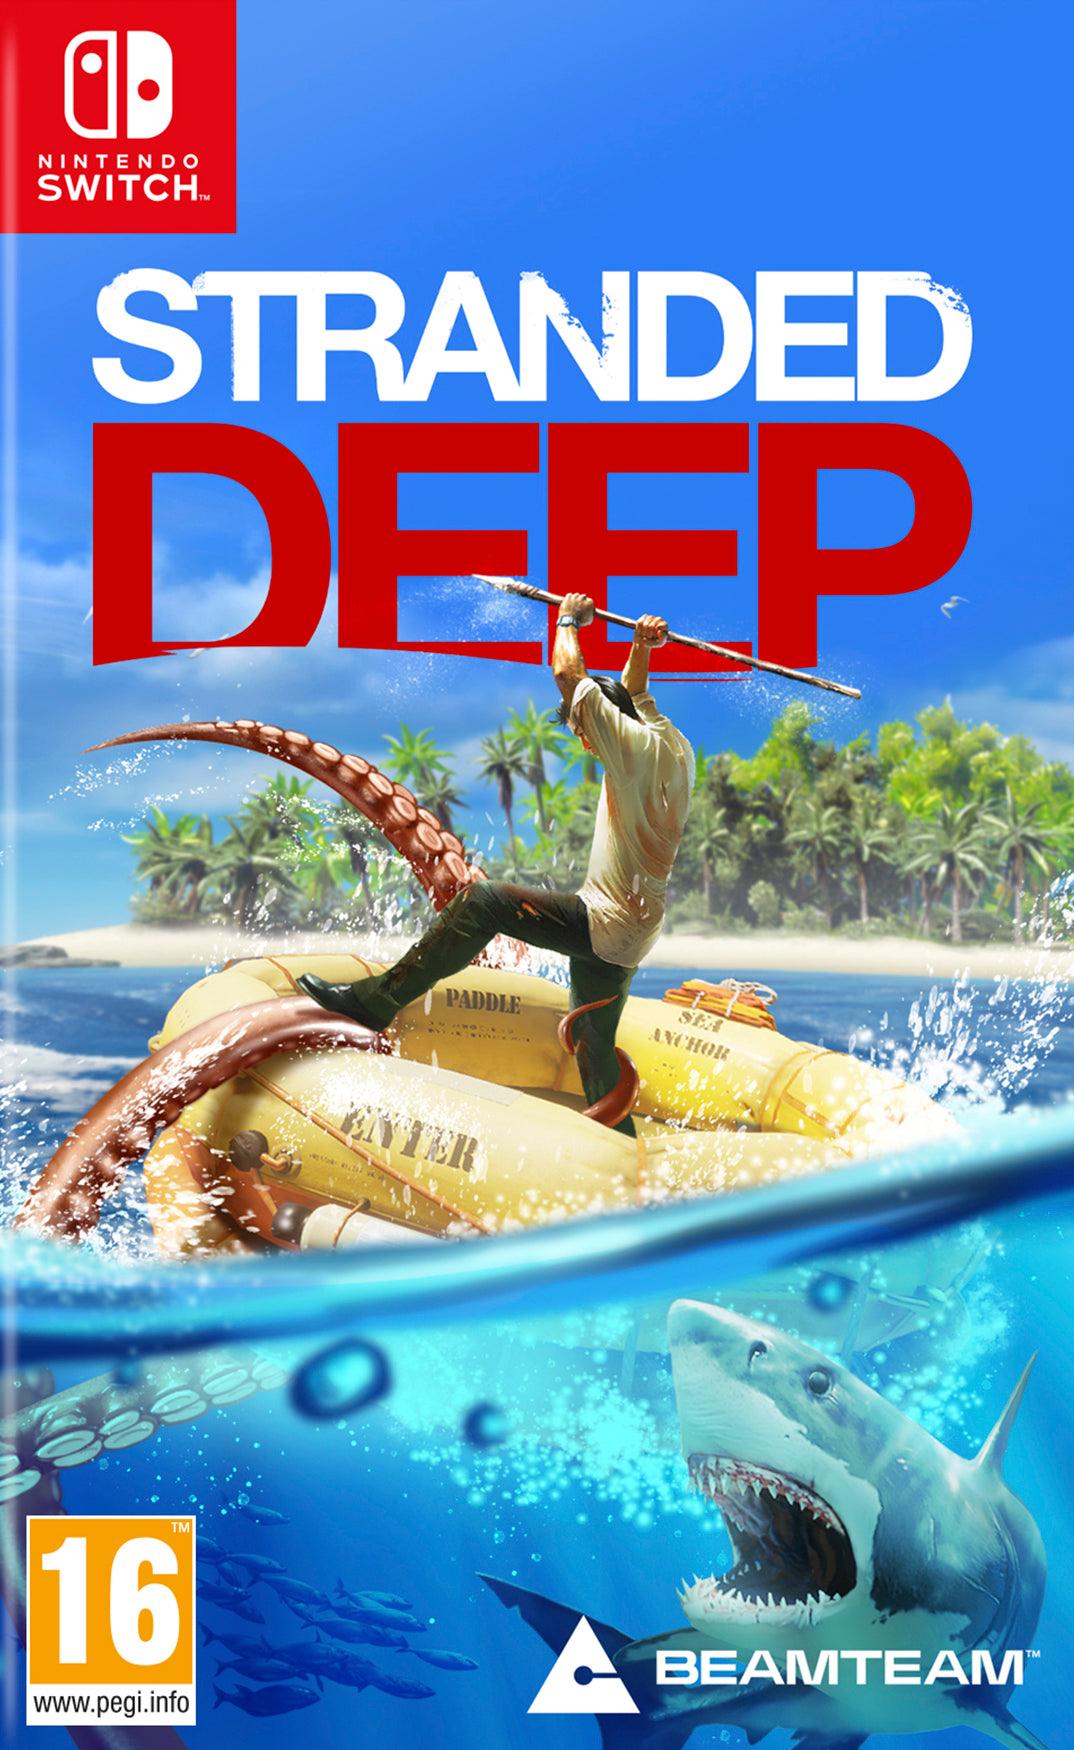 Stranded Deep - Want a New Gadget